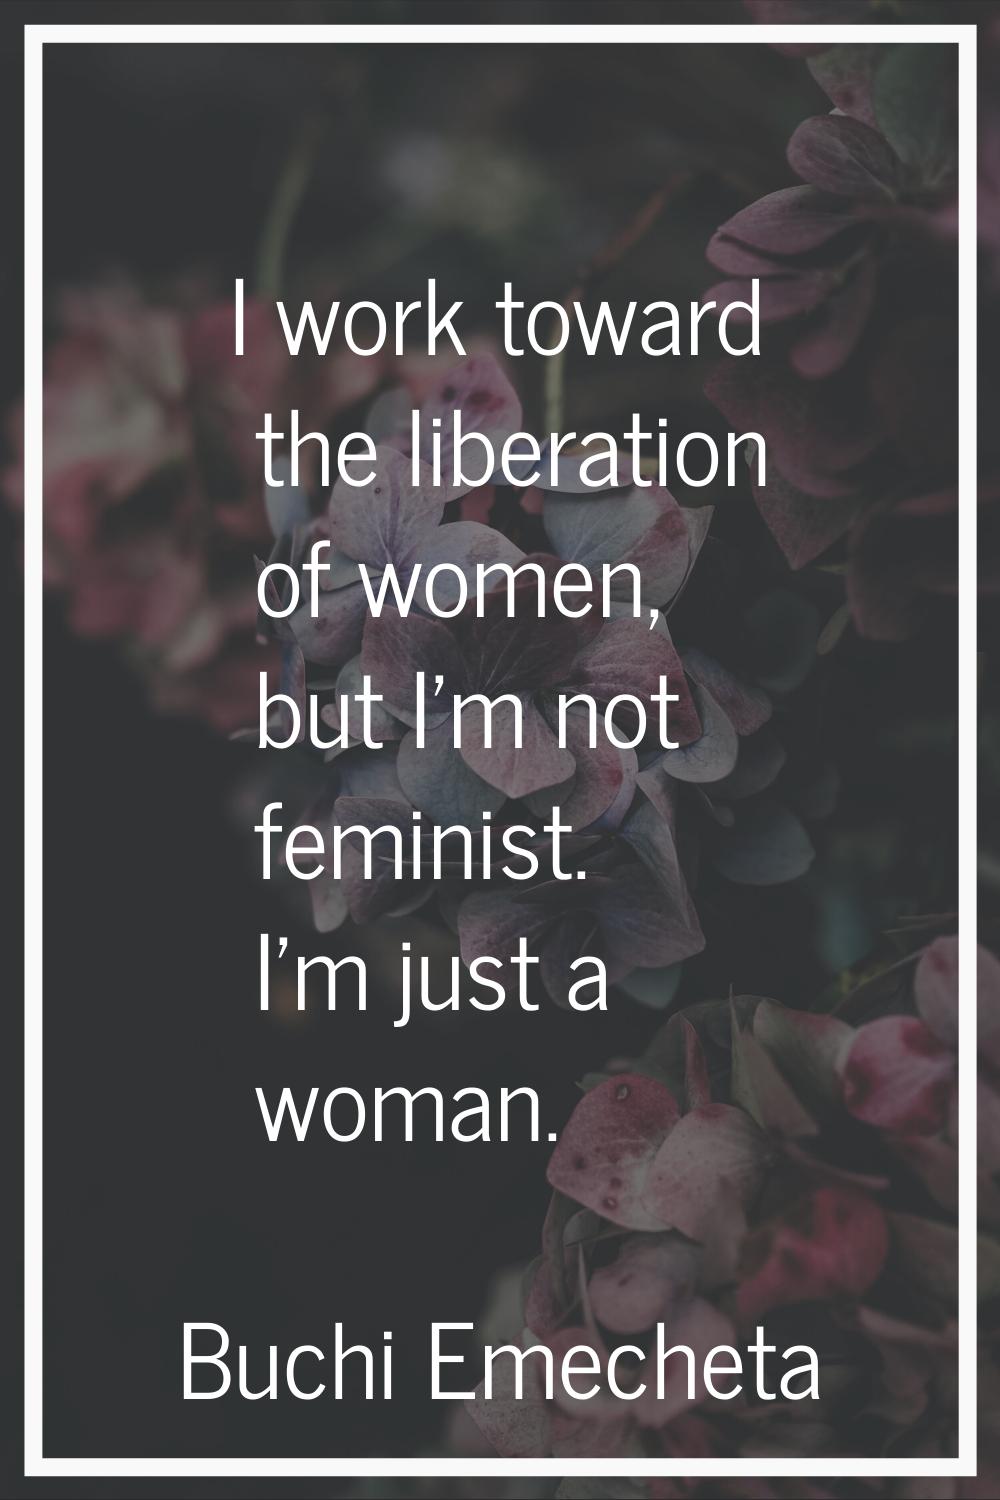 I work toward the liberation of women, but I'm not feminist. I'm just a woman.